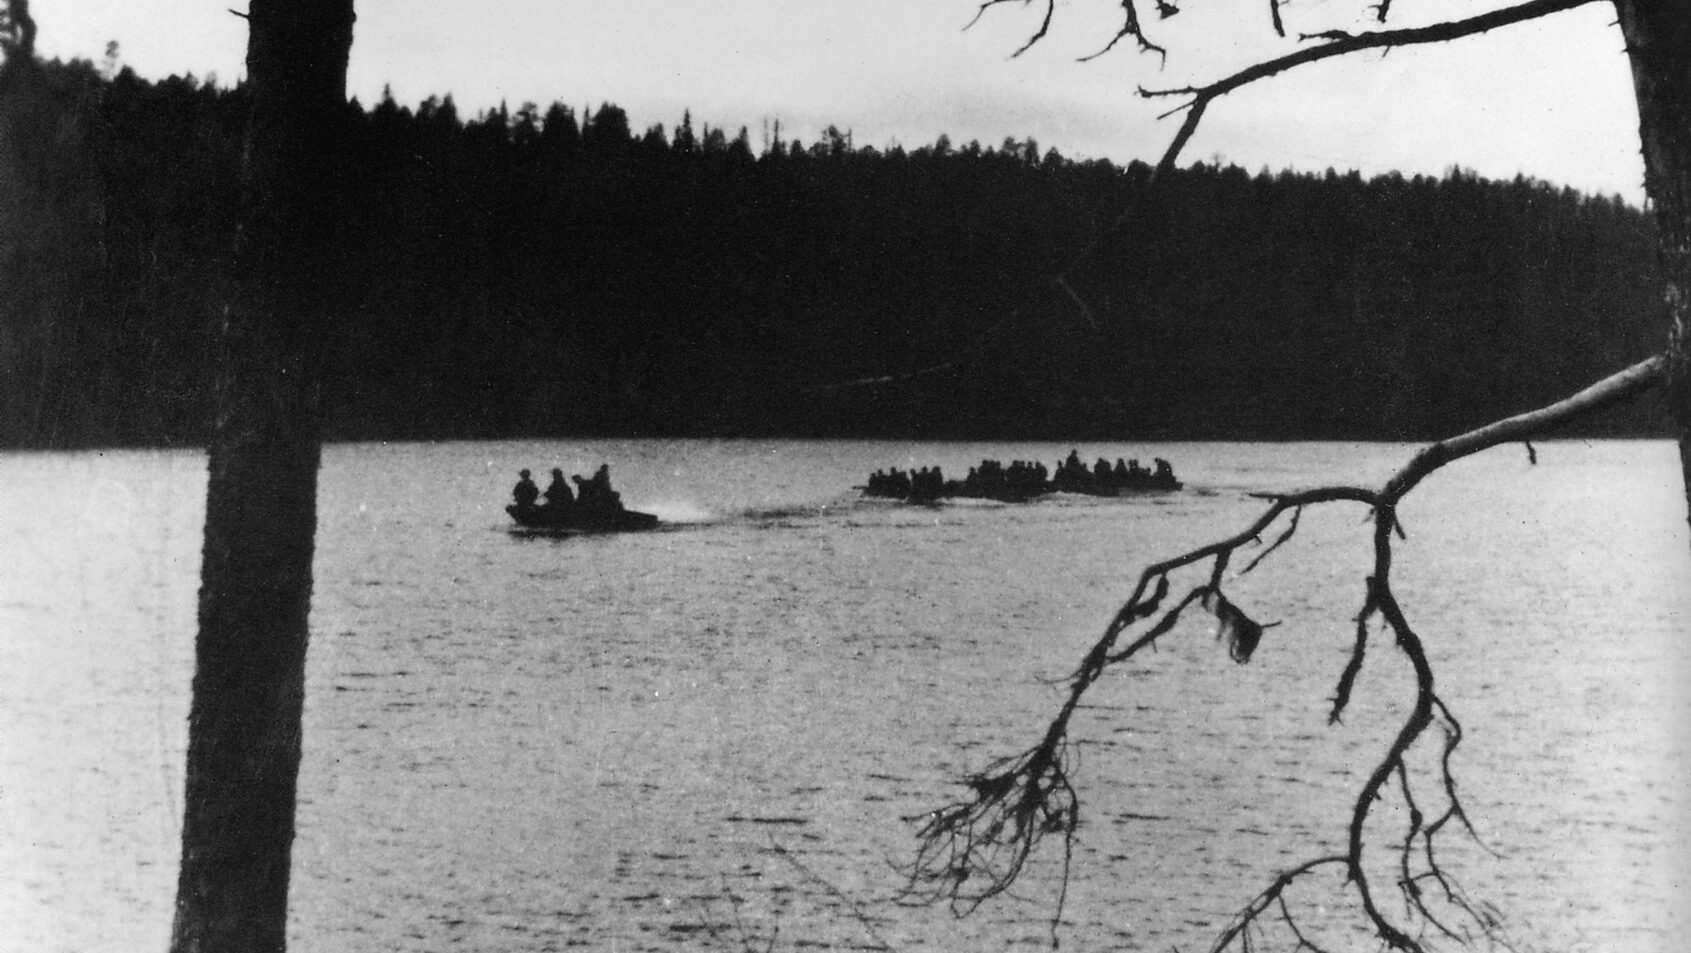 Brandenburg commandos cross a lake behind enemy lines on the Eastern Front.